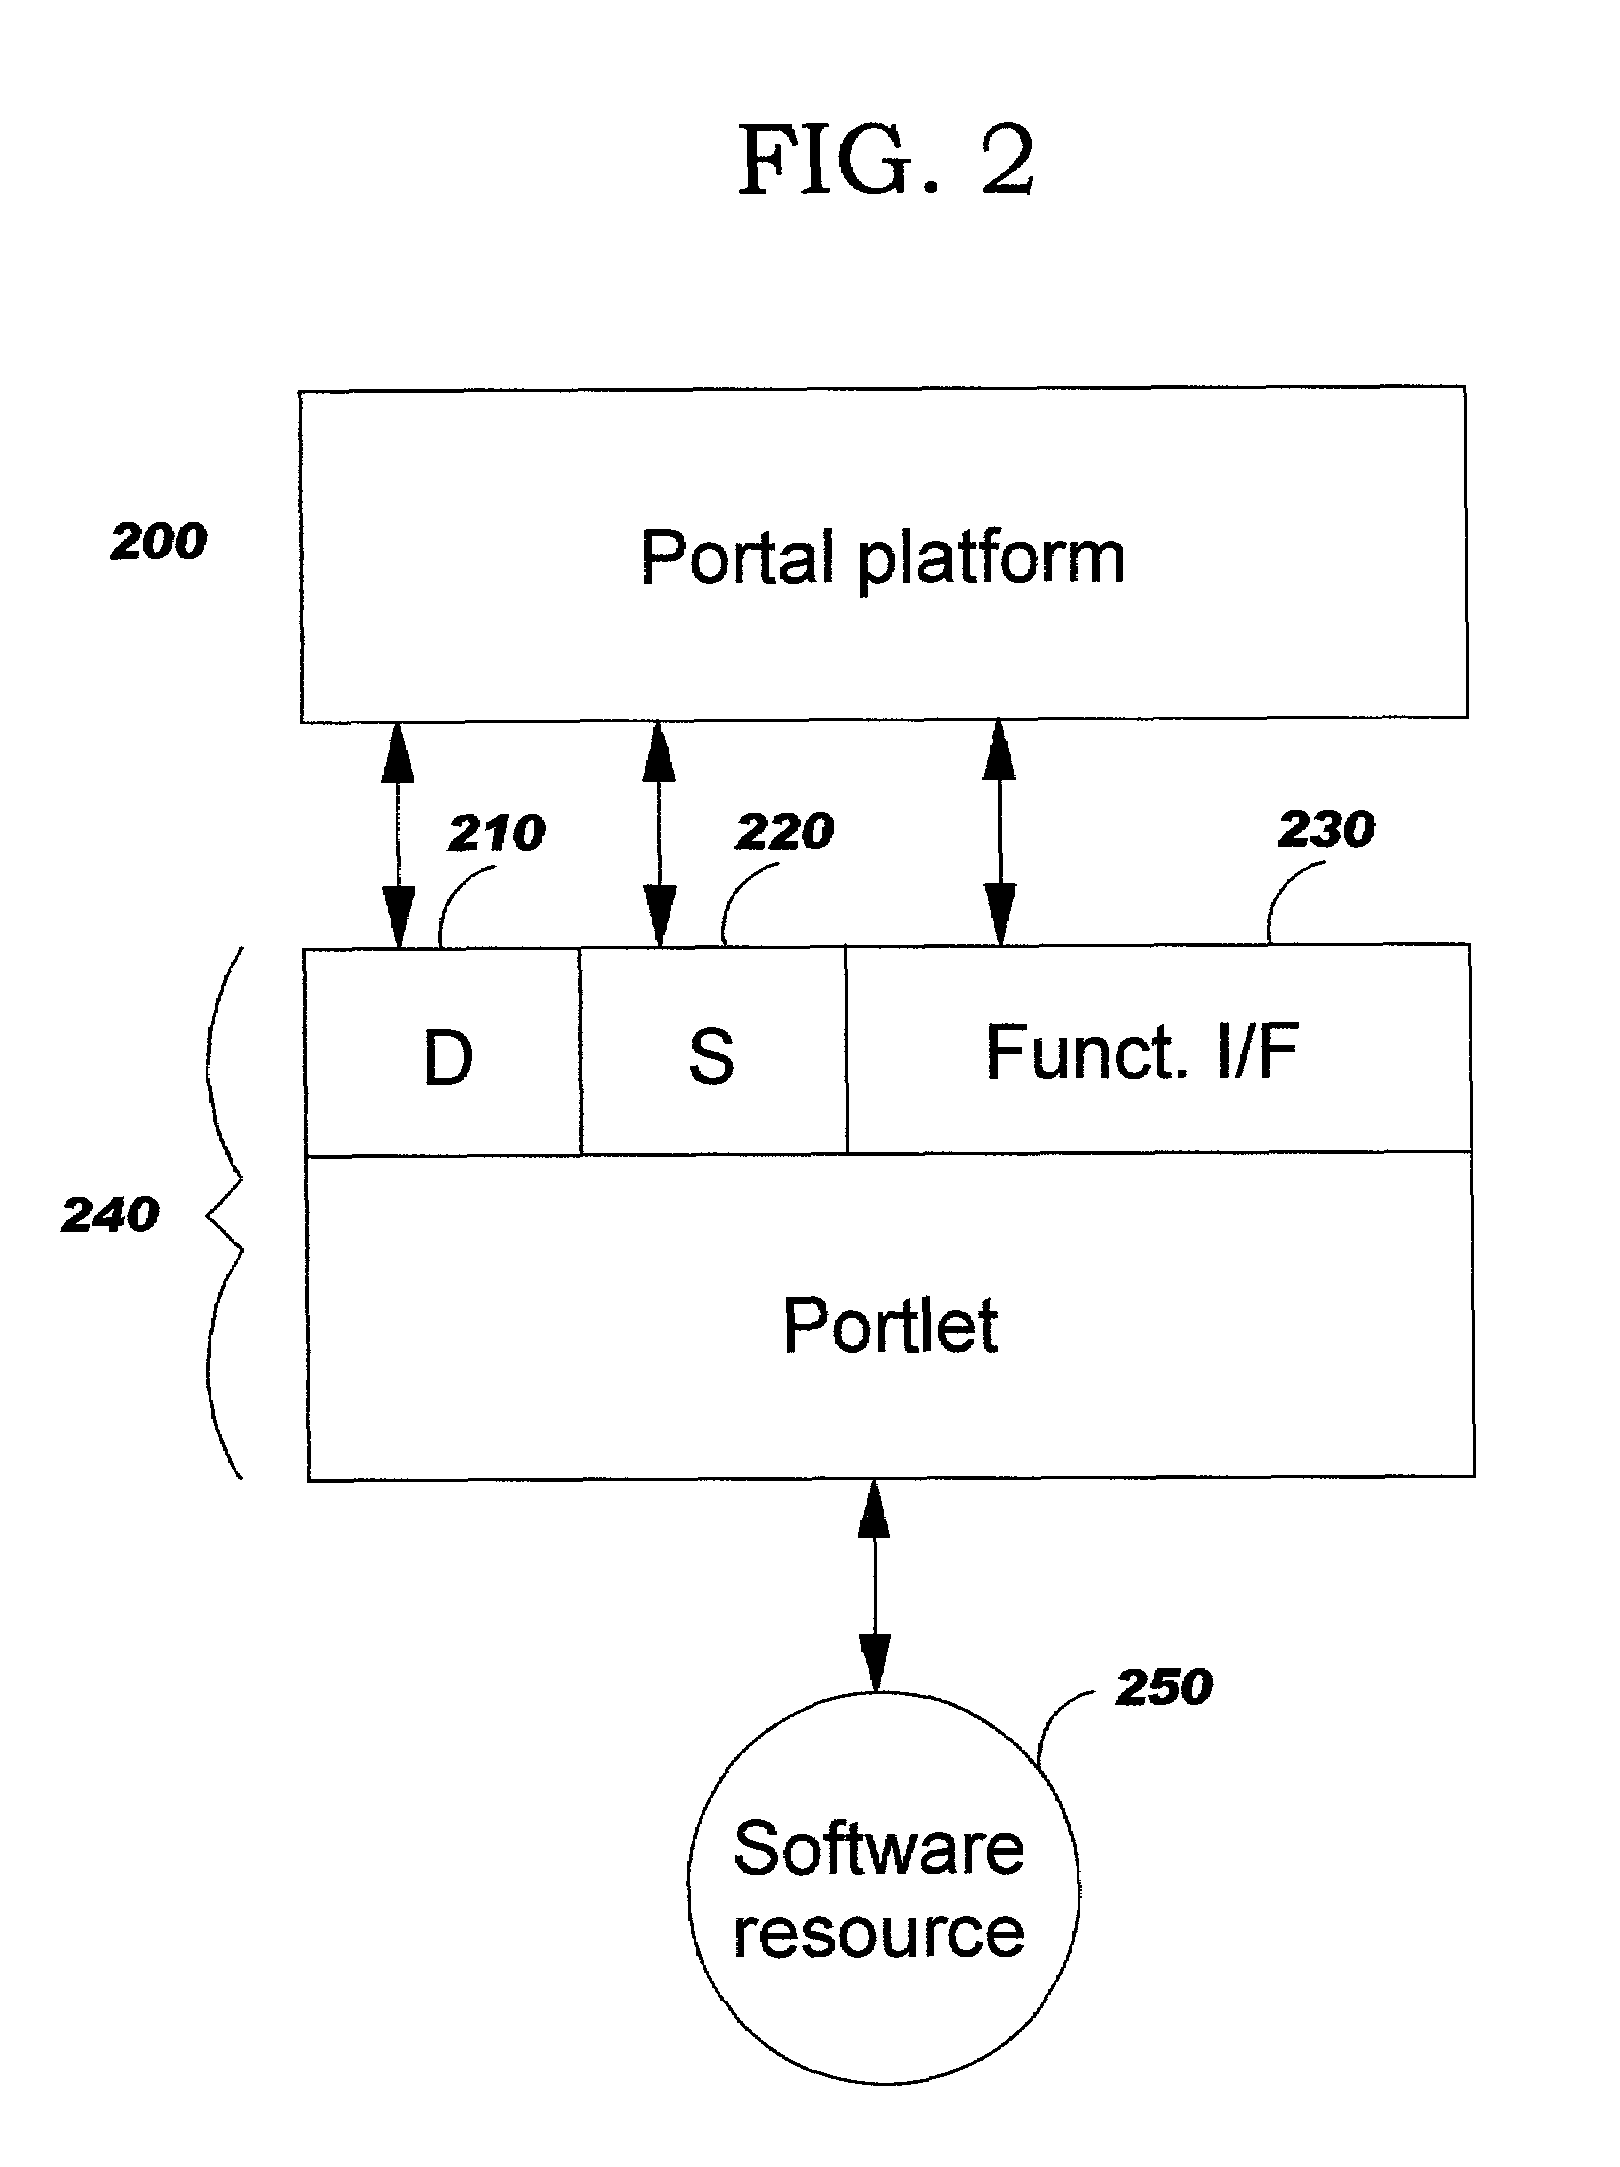 Provisioning aggregated services in a distributed computing environment